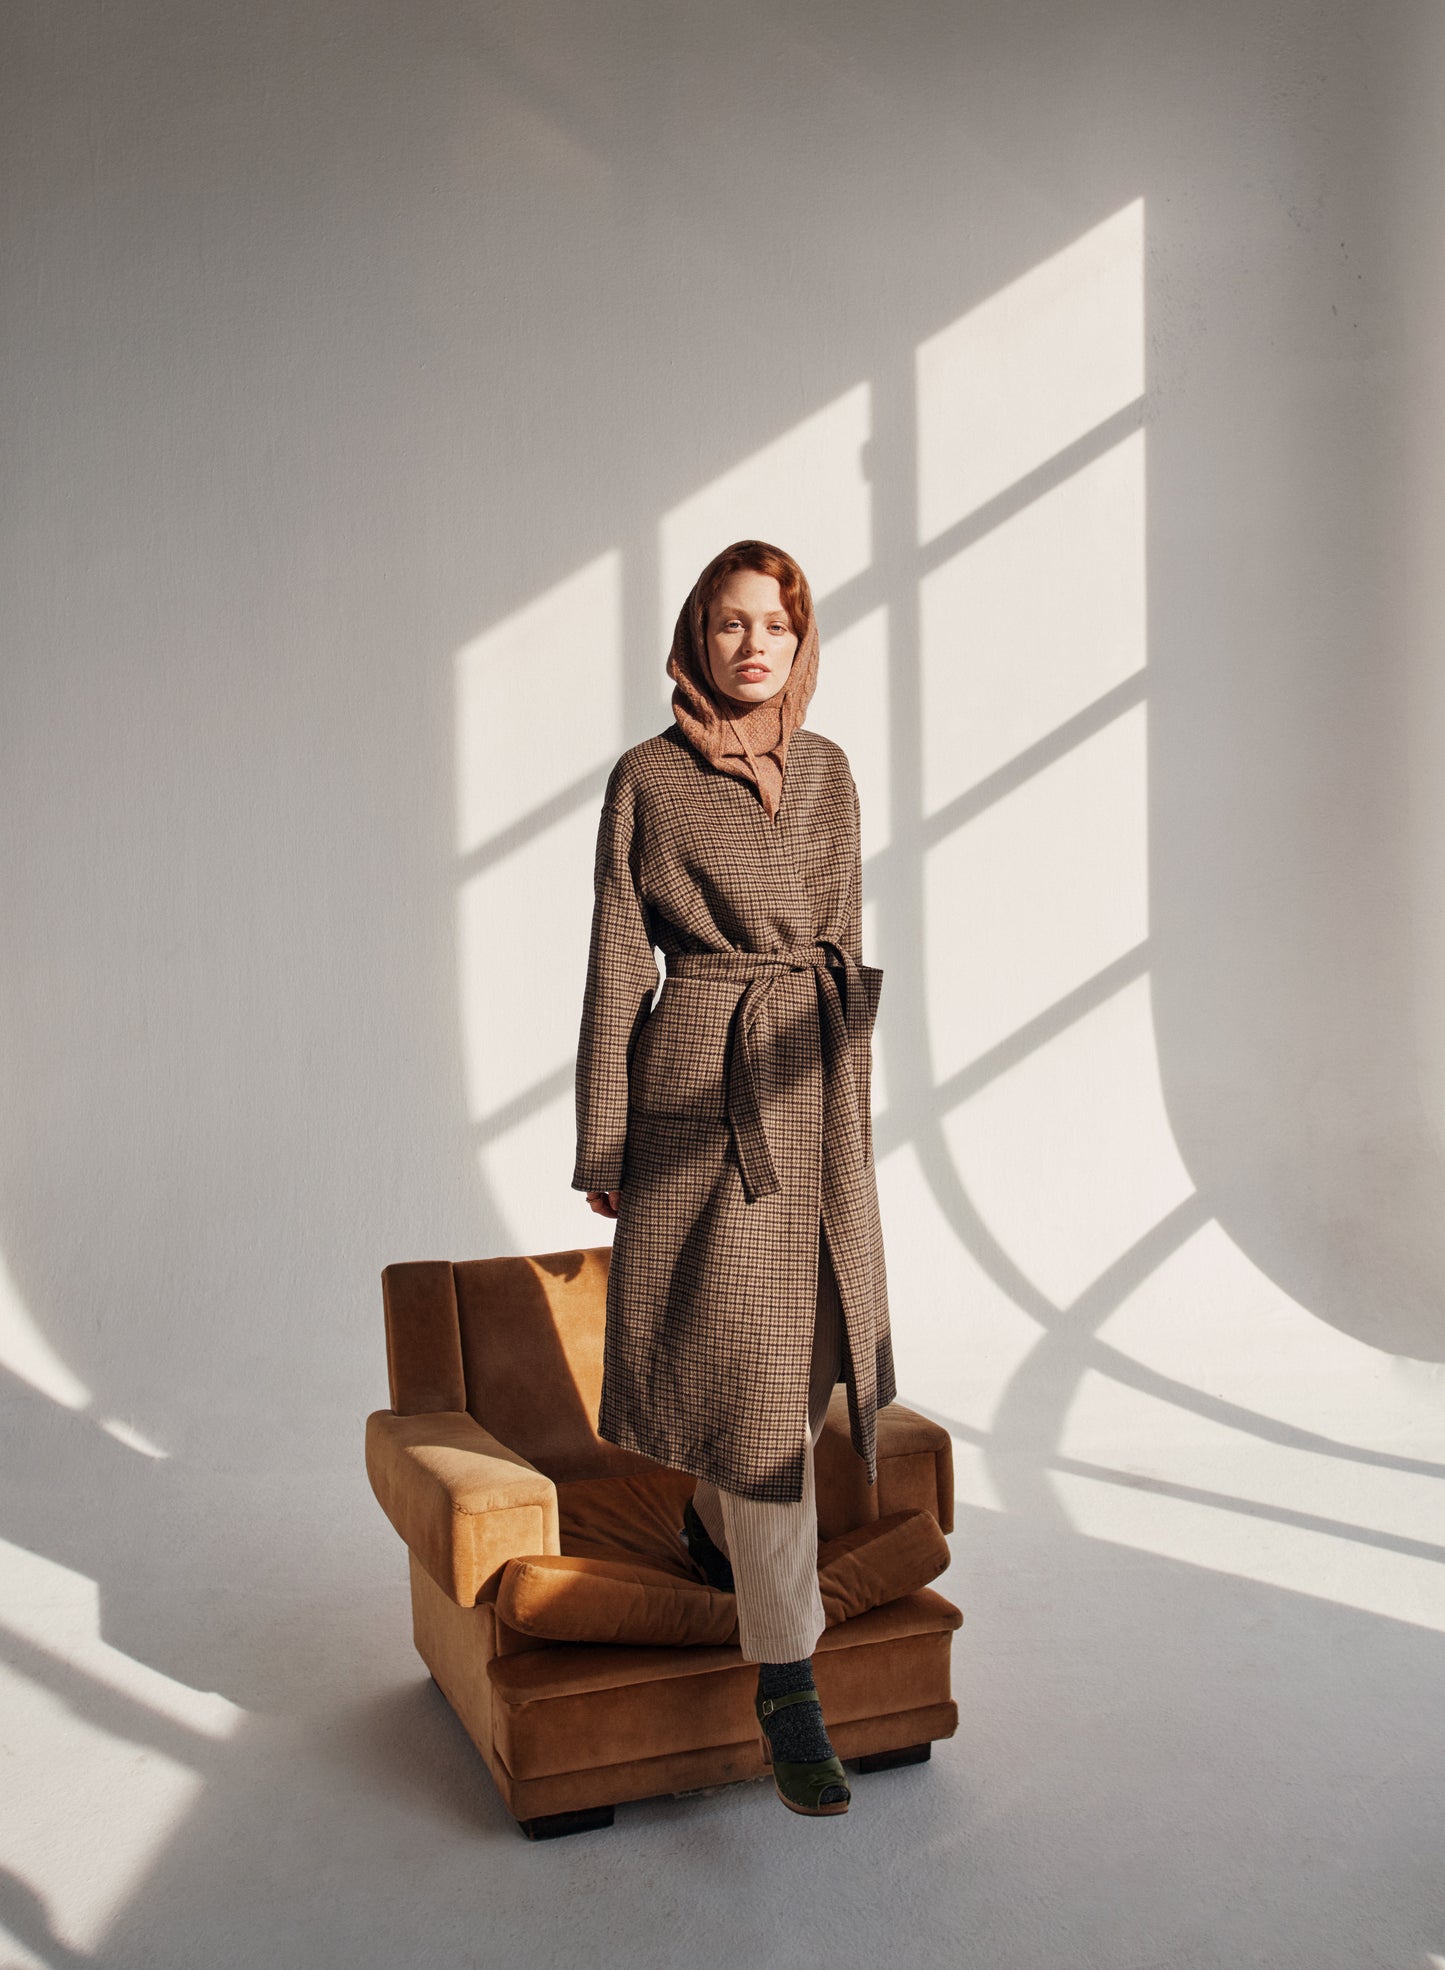 A celebrated addition to any winter wardrobe, the Marta Coat is the perfect blend of sophistication and practicality. Crafted from a herringbone wool for a timeless style and tailored silhouette, and complete with an adjustable tie waist for a flattering fit.